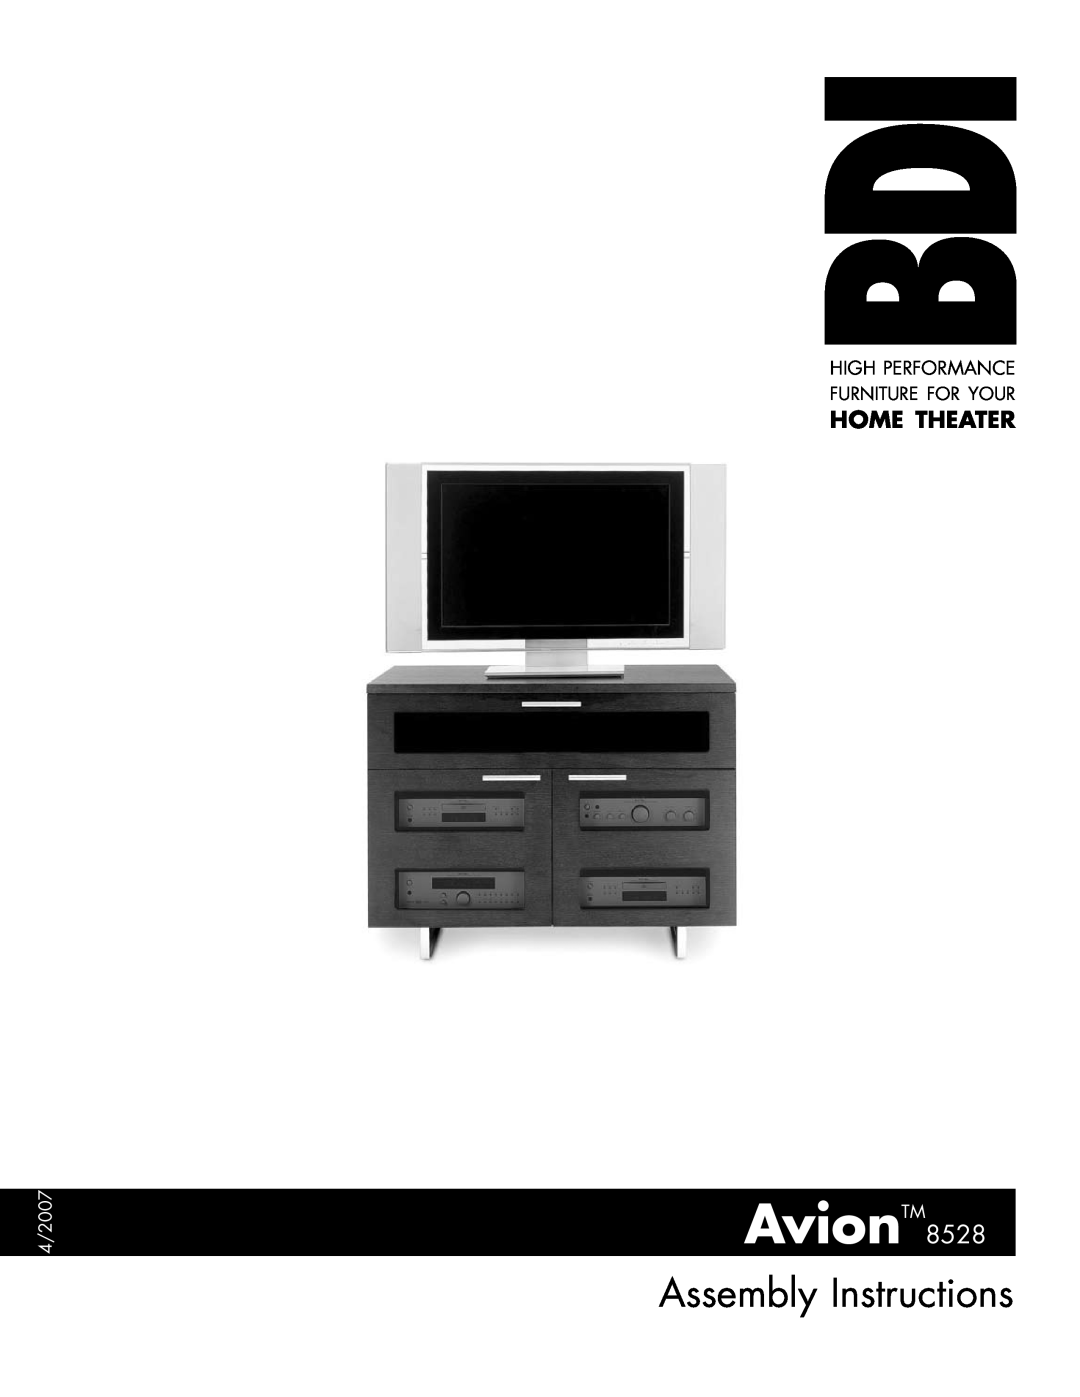 Becker Designed manual AvionTM8528A, Assembly Instructions, Home Theater, High Performance, 4/2007 